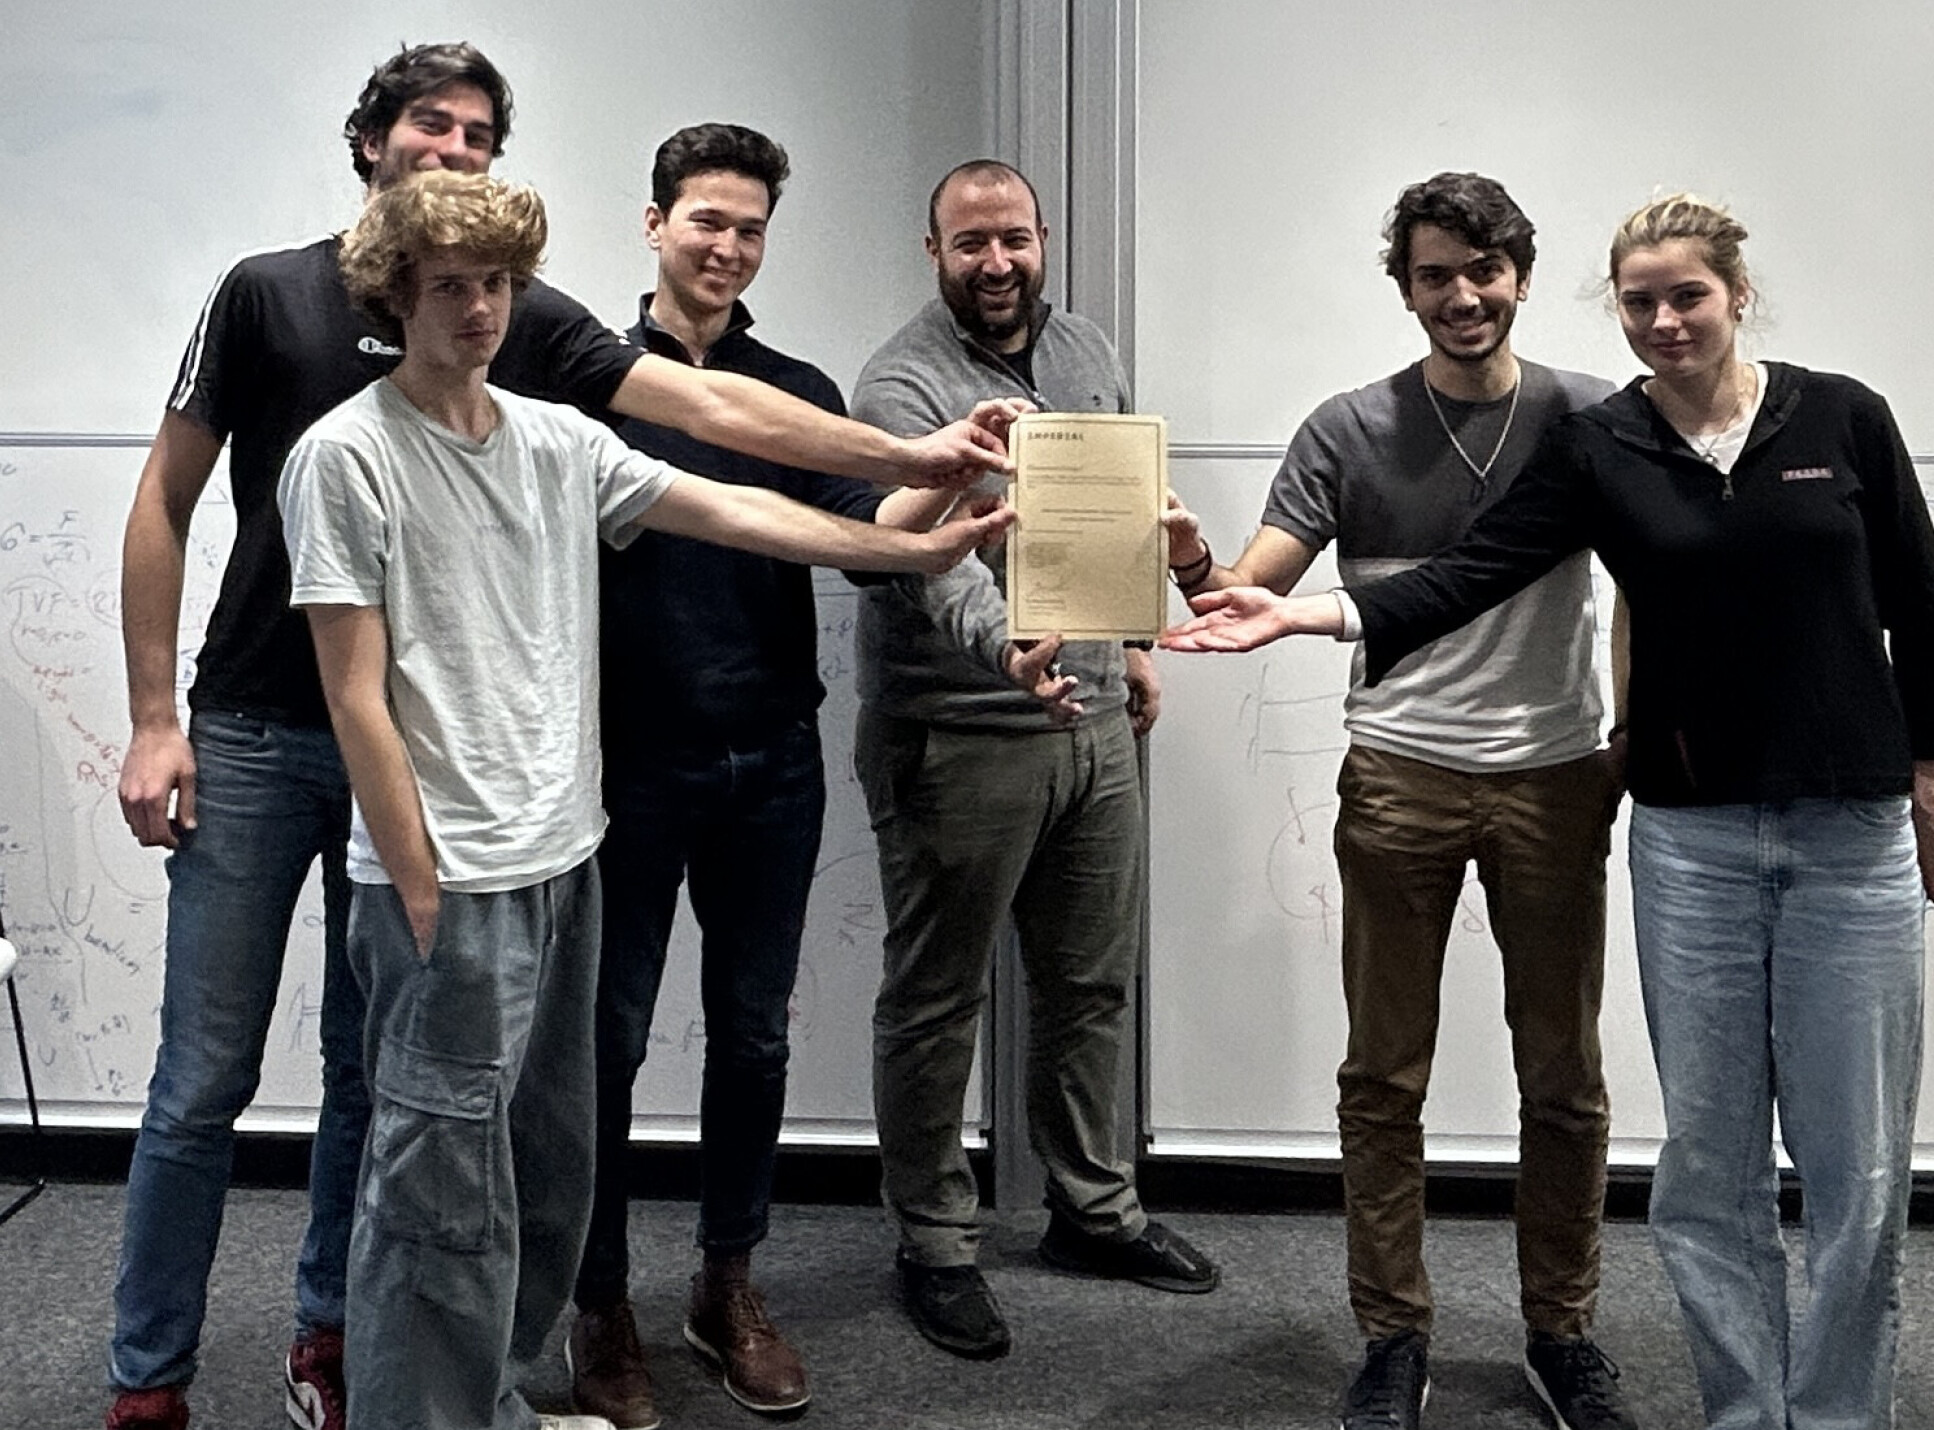 Dr Dimitrios Chantzis presents the ‘Award for Best Business Case’ to MPT Coursework Group 2